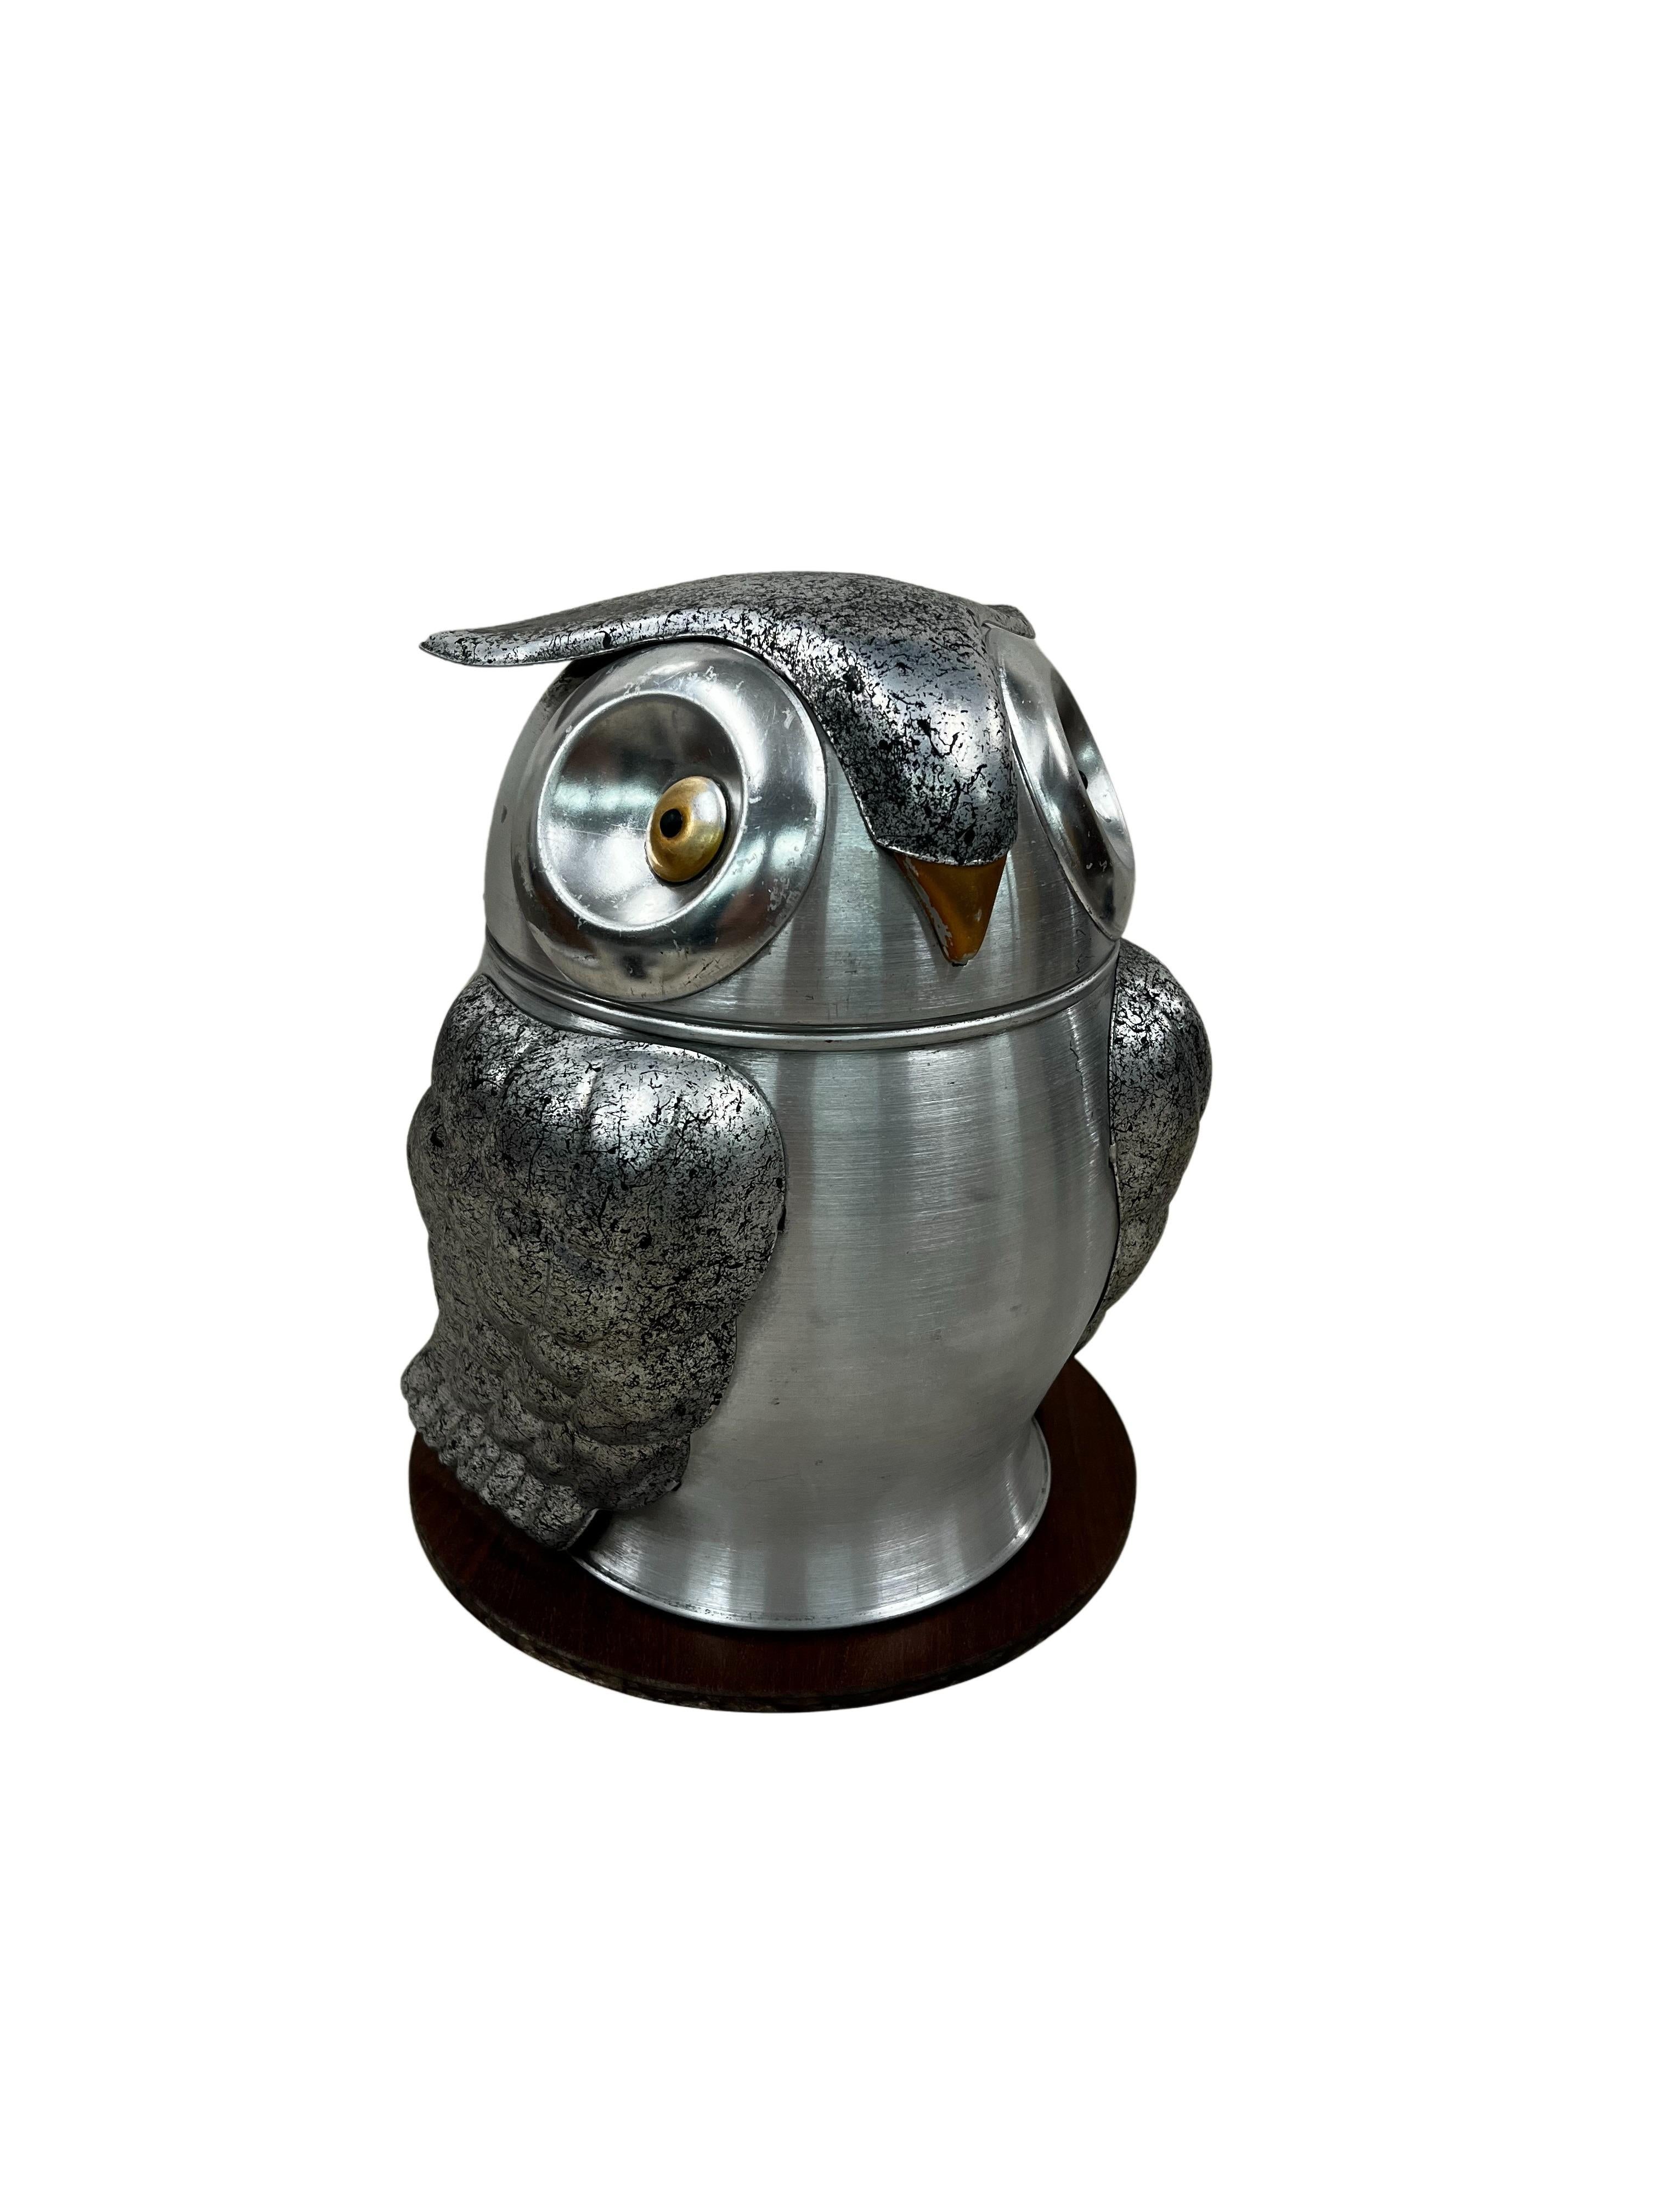 This charming ice bucket is a spectacular piece of use and decoration for any table-scape. 

This beautifully executed ice bucket is in the shape of an owl of an eclectic design.

The wonderfully crafted owl can be opened from above with a plastic